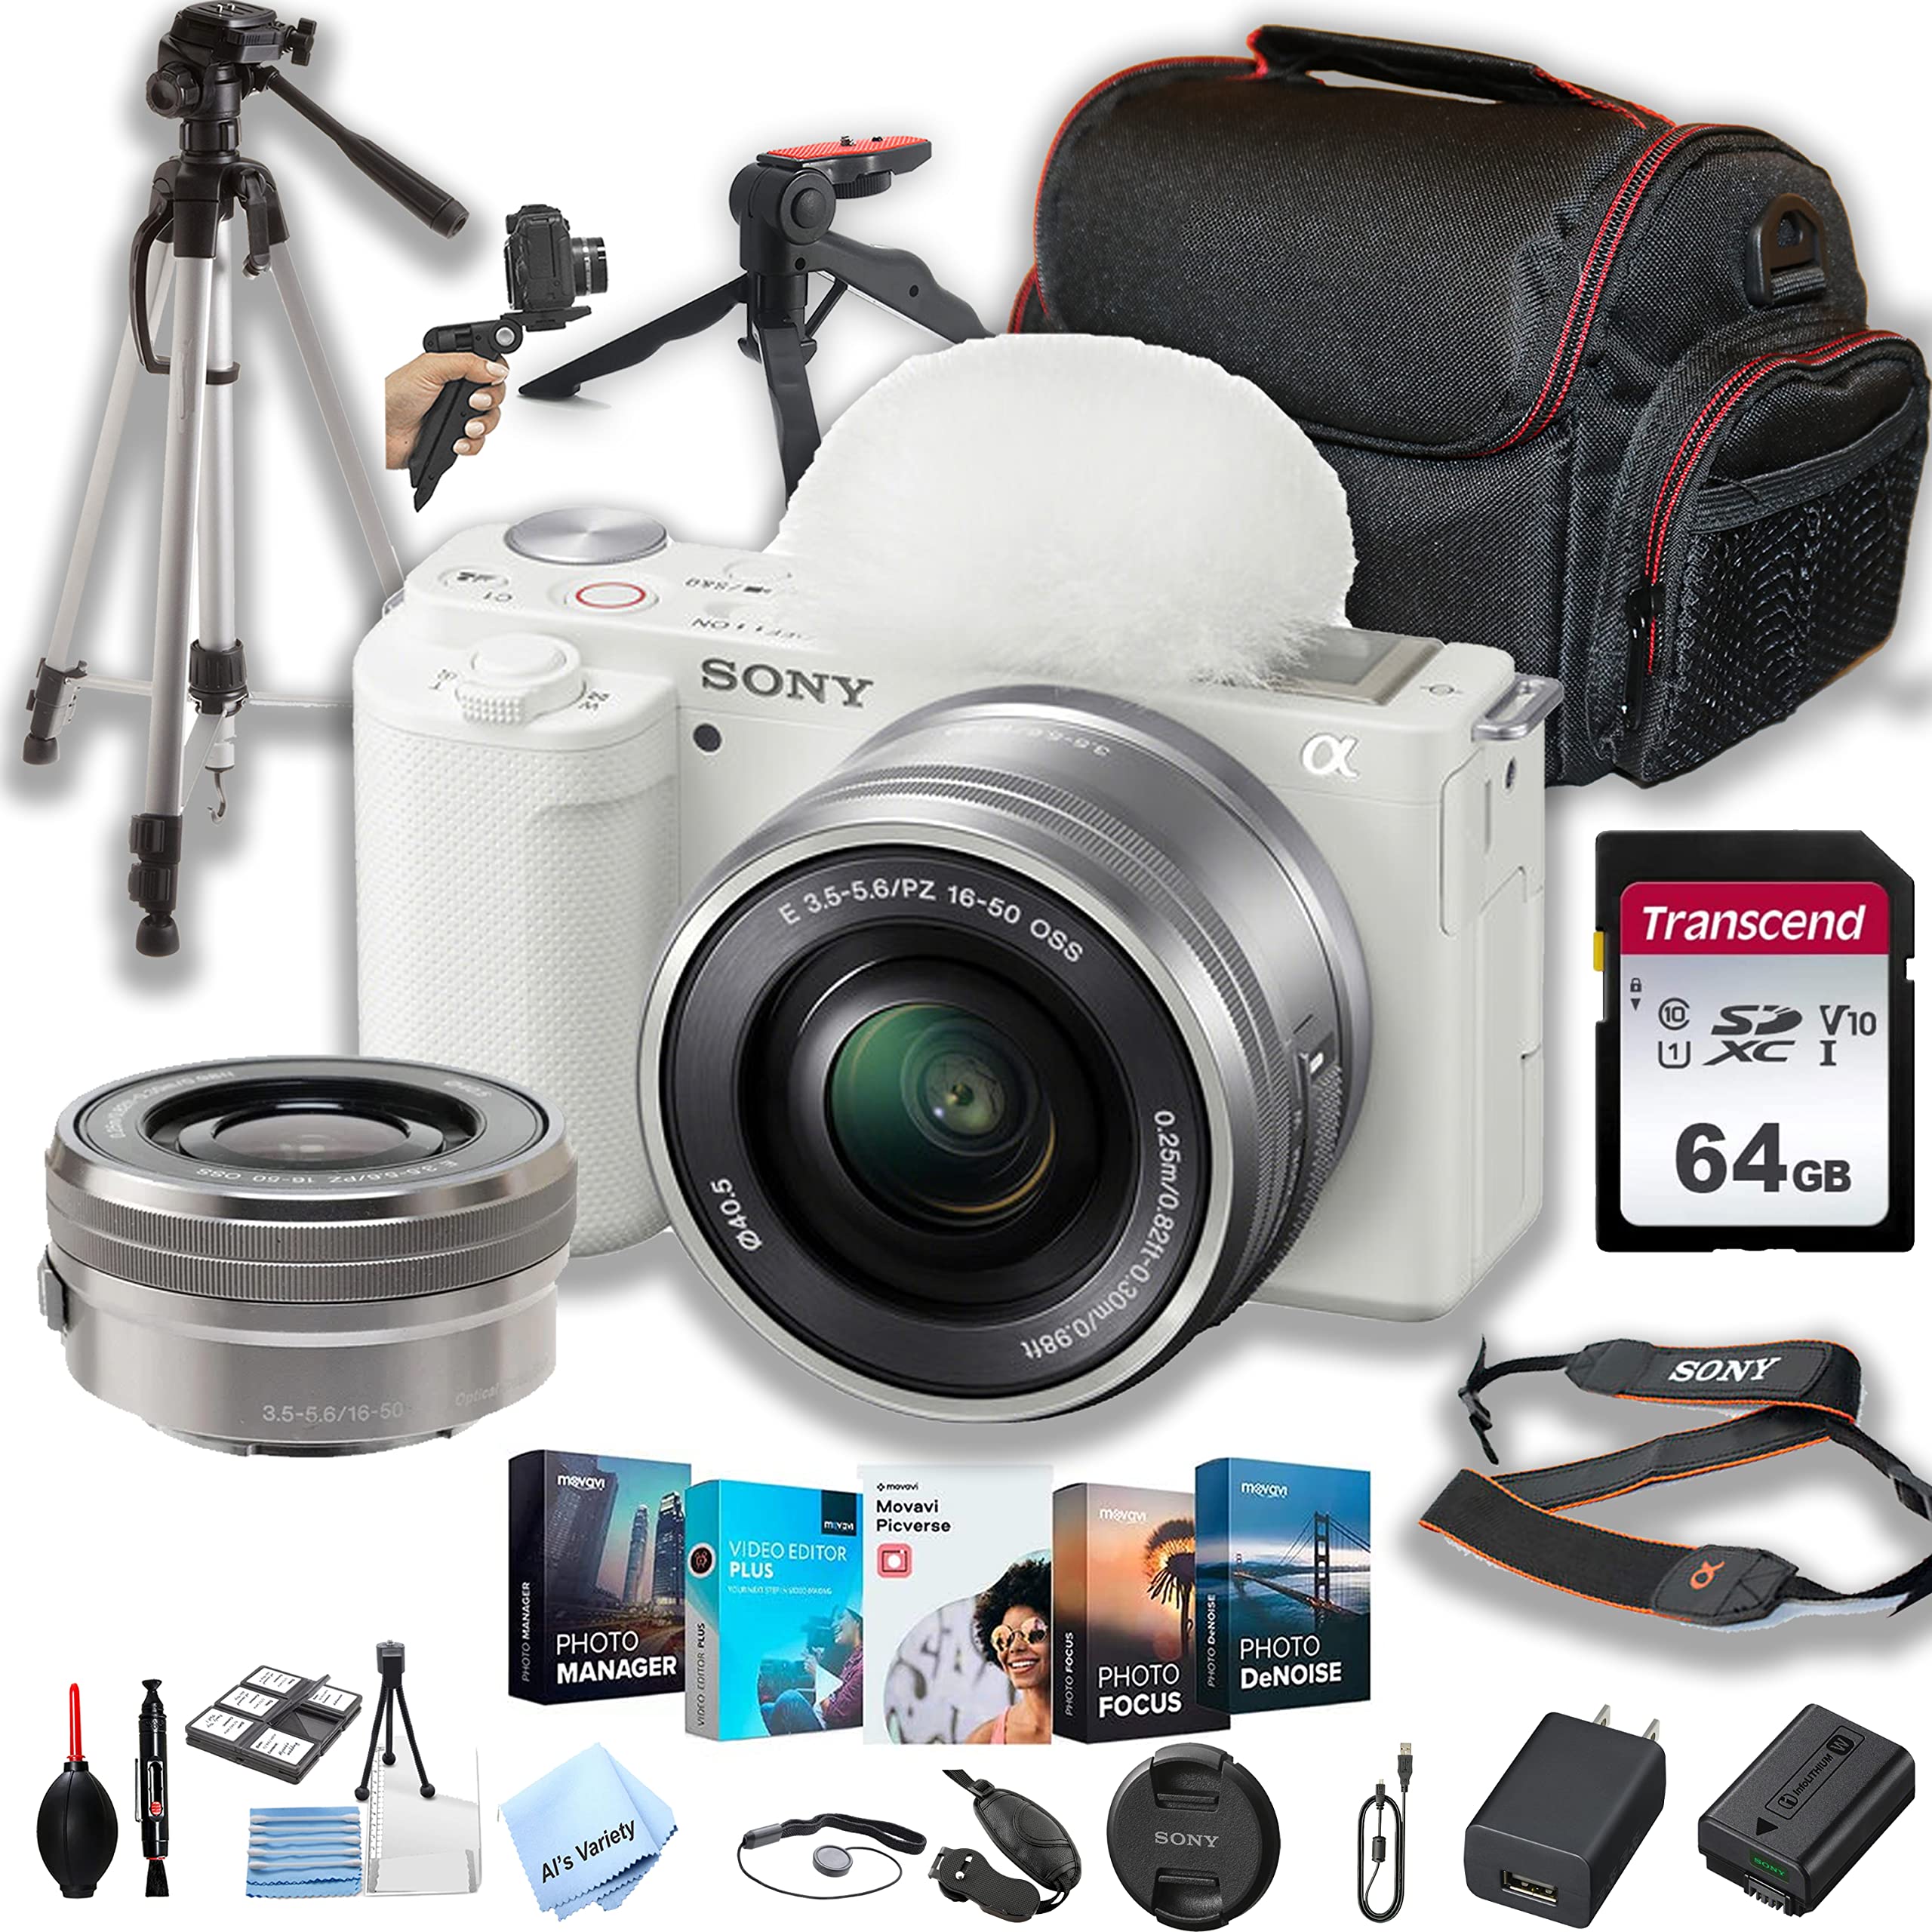 Sony ZV-E10 (White) Mirrorless Camera with 16-50mm Lens + 64GB Memory + Case+ Steady Grip Pod + Tripod+ Software Pack + More (30pc Bundle) (Renewed)